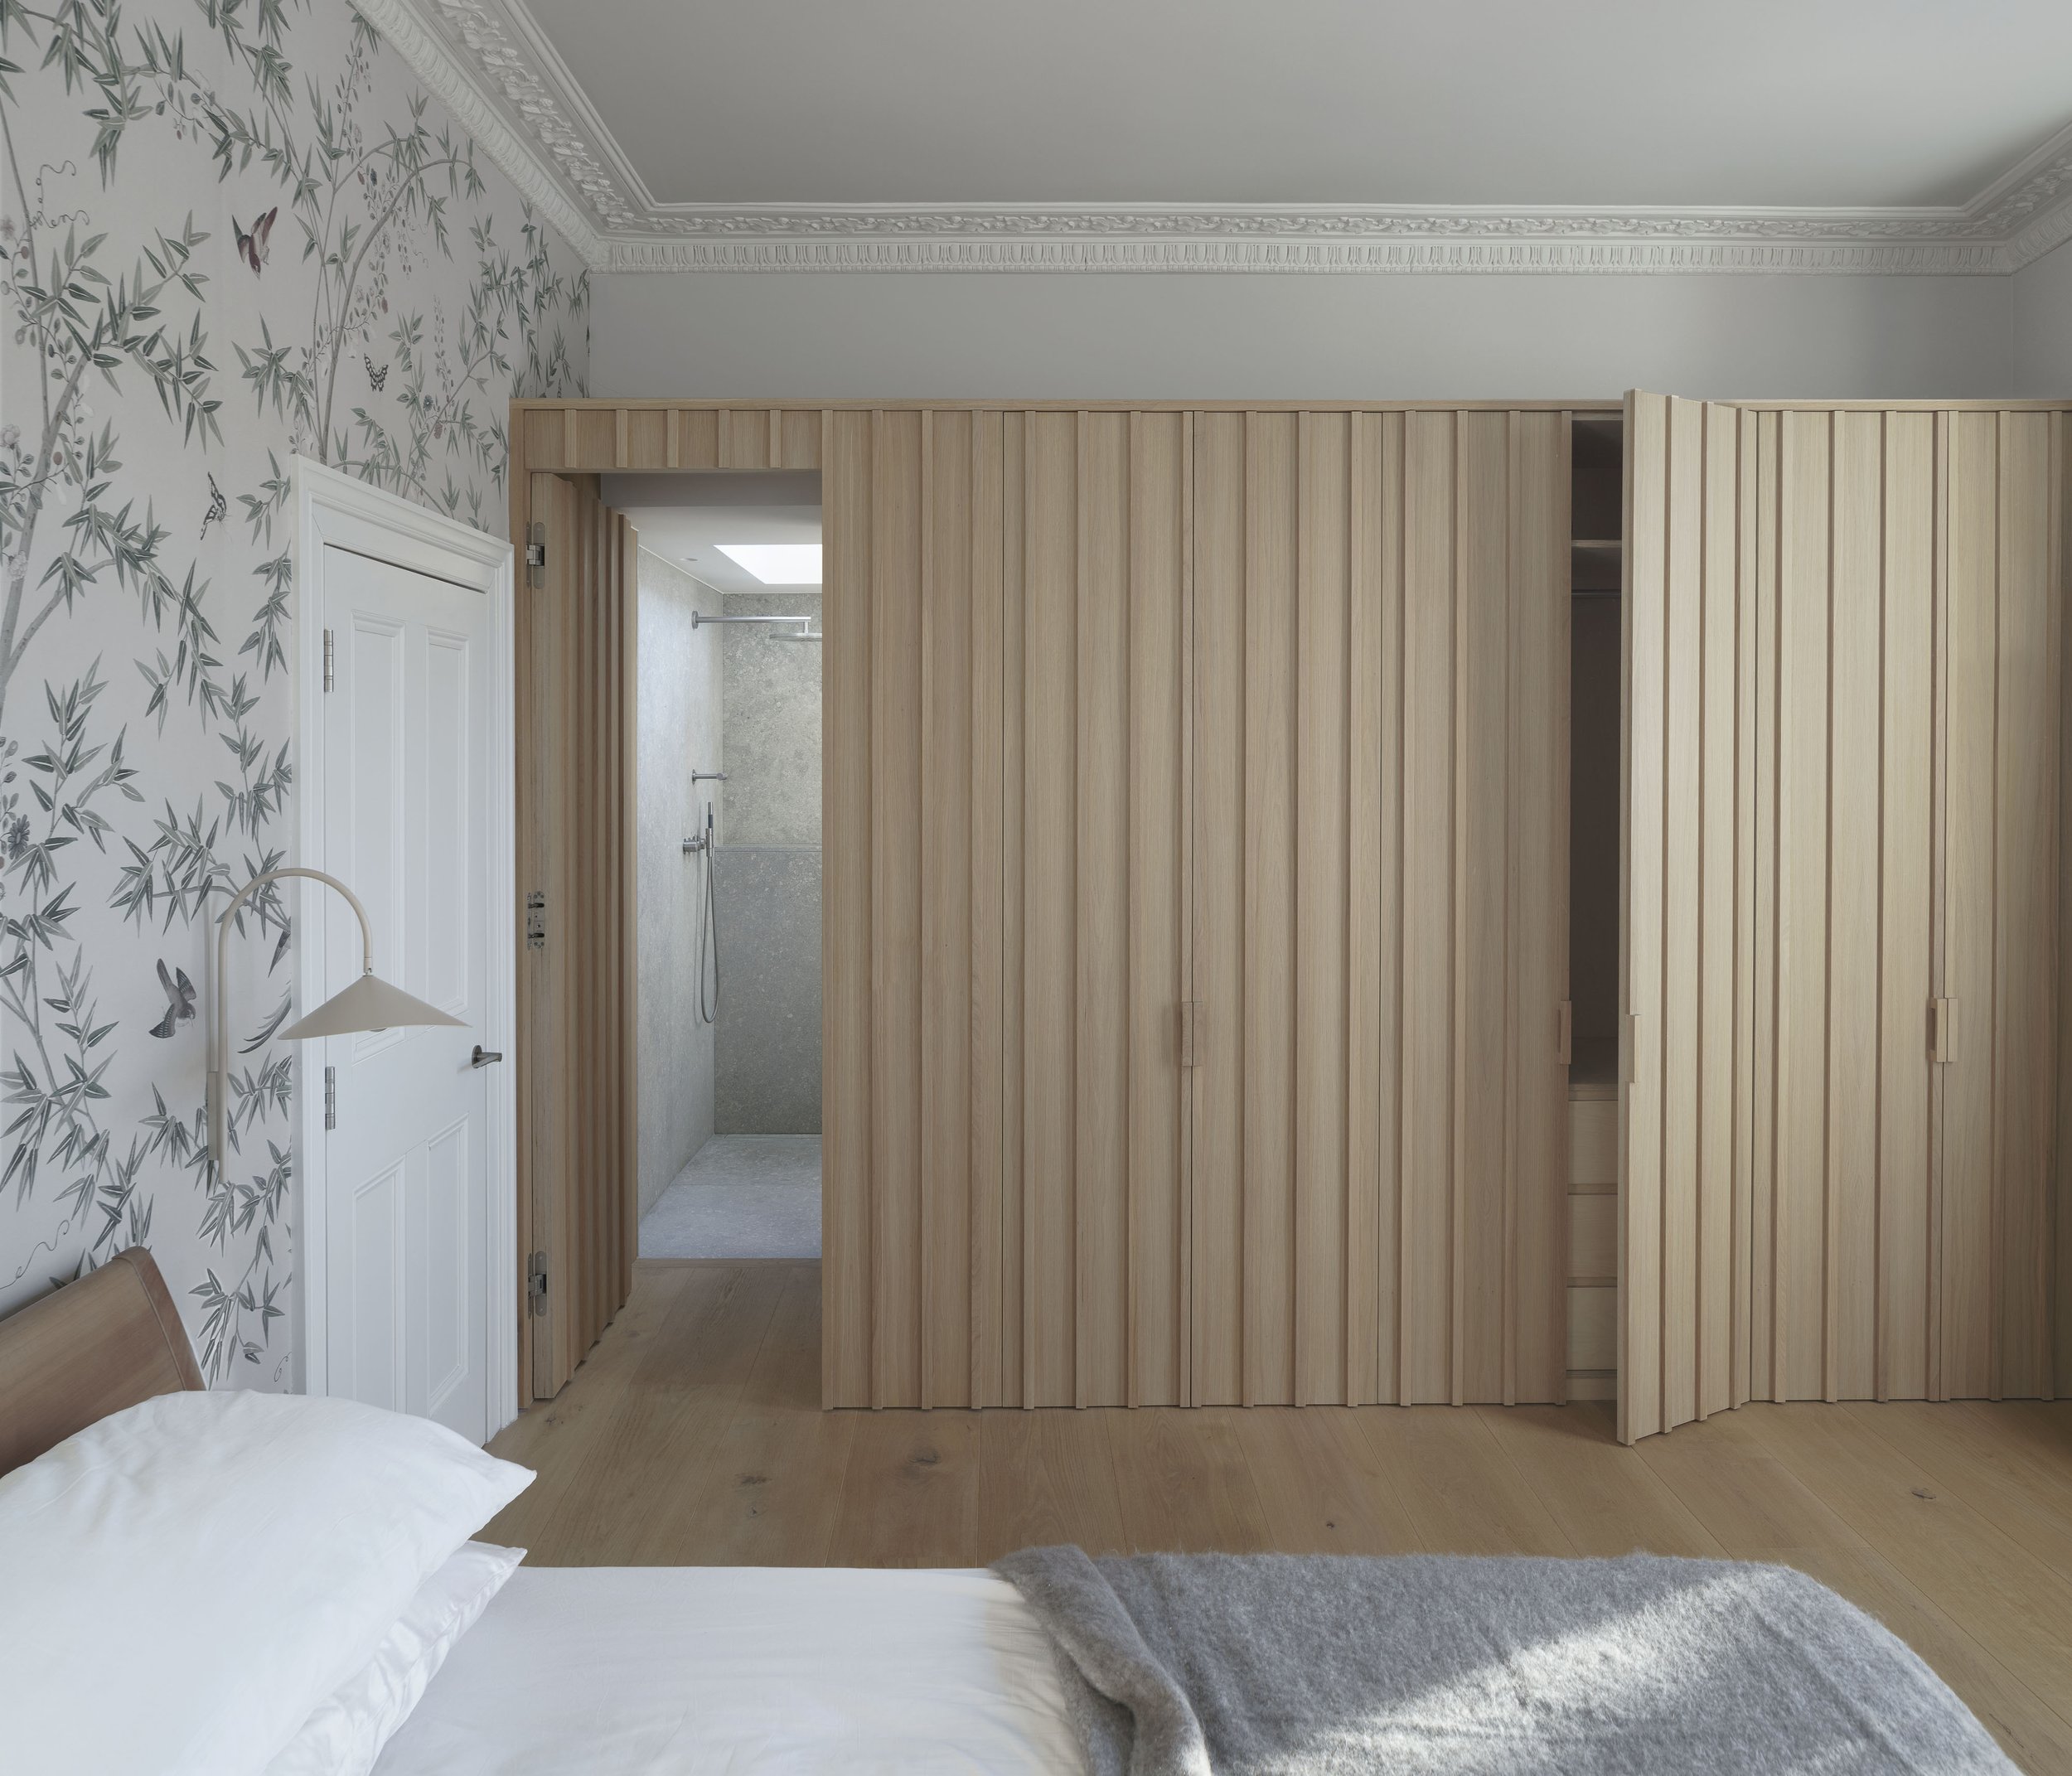 Architecture-for-London_Stone-House_Bedroom-1_Credit_Building-Narratives.jpg